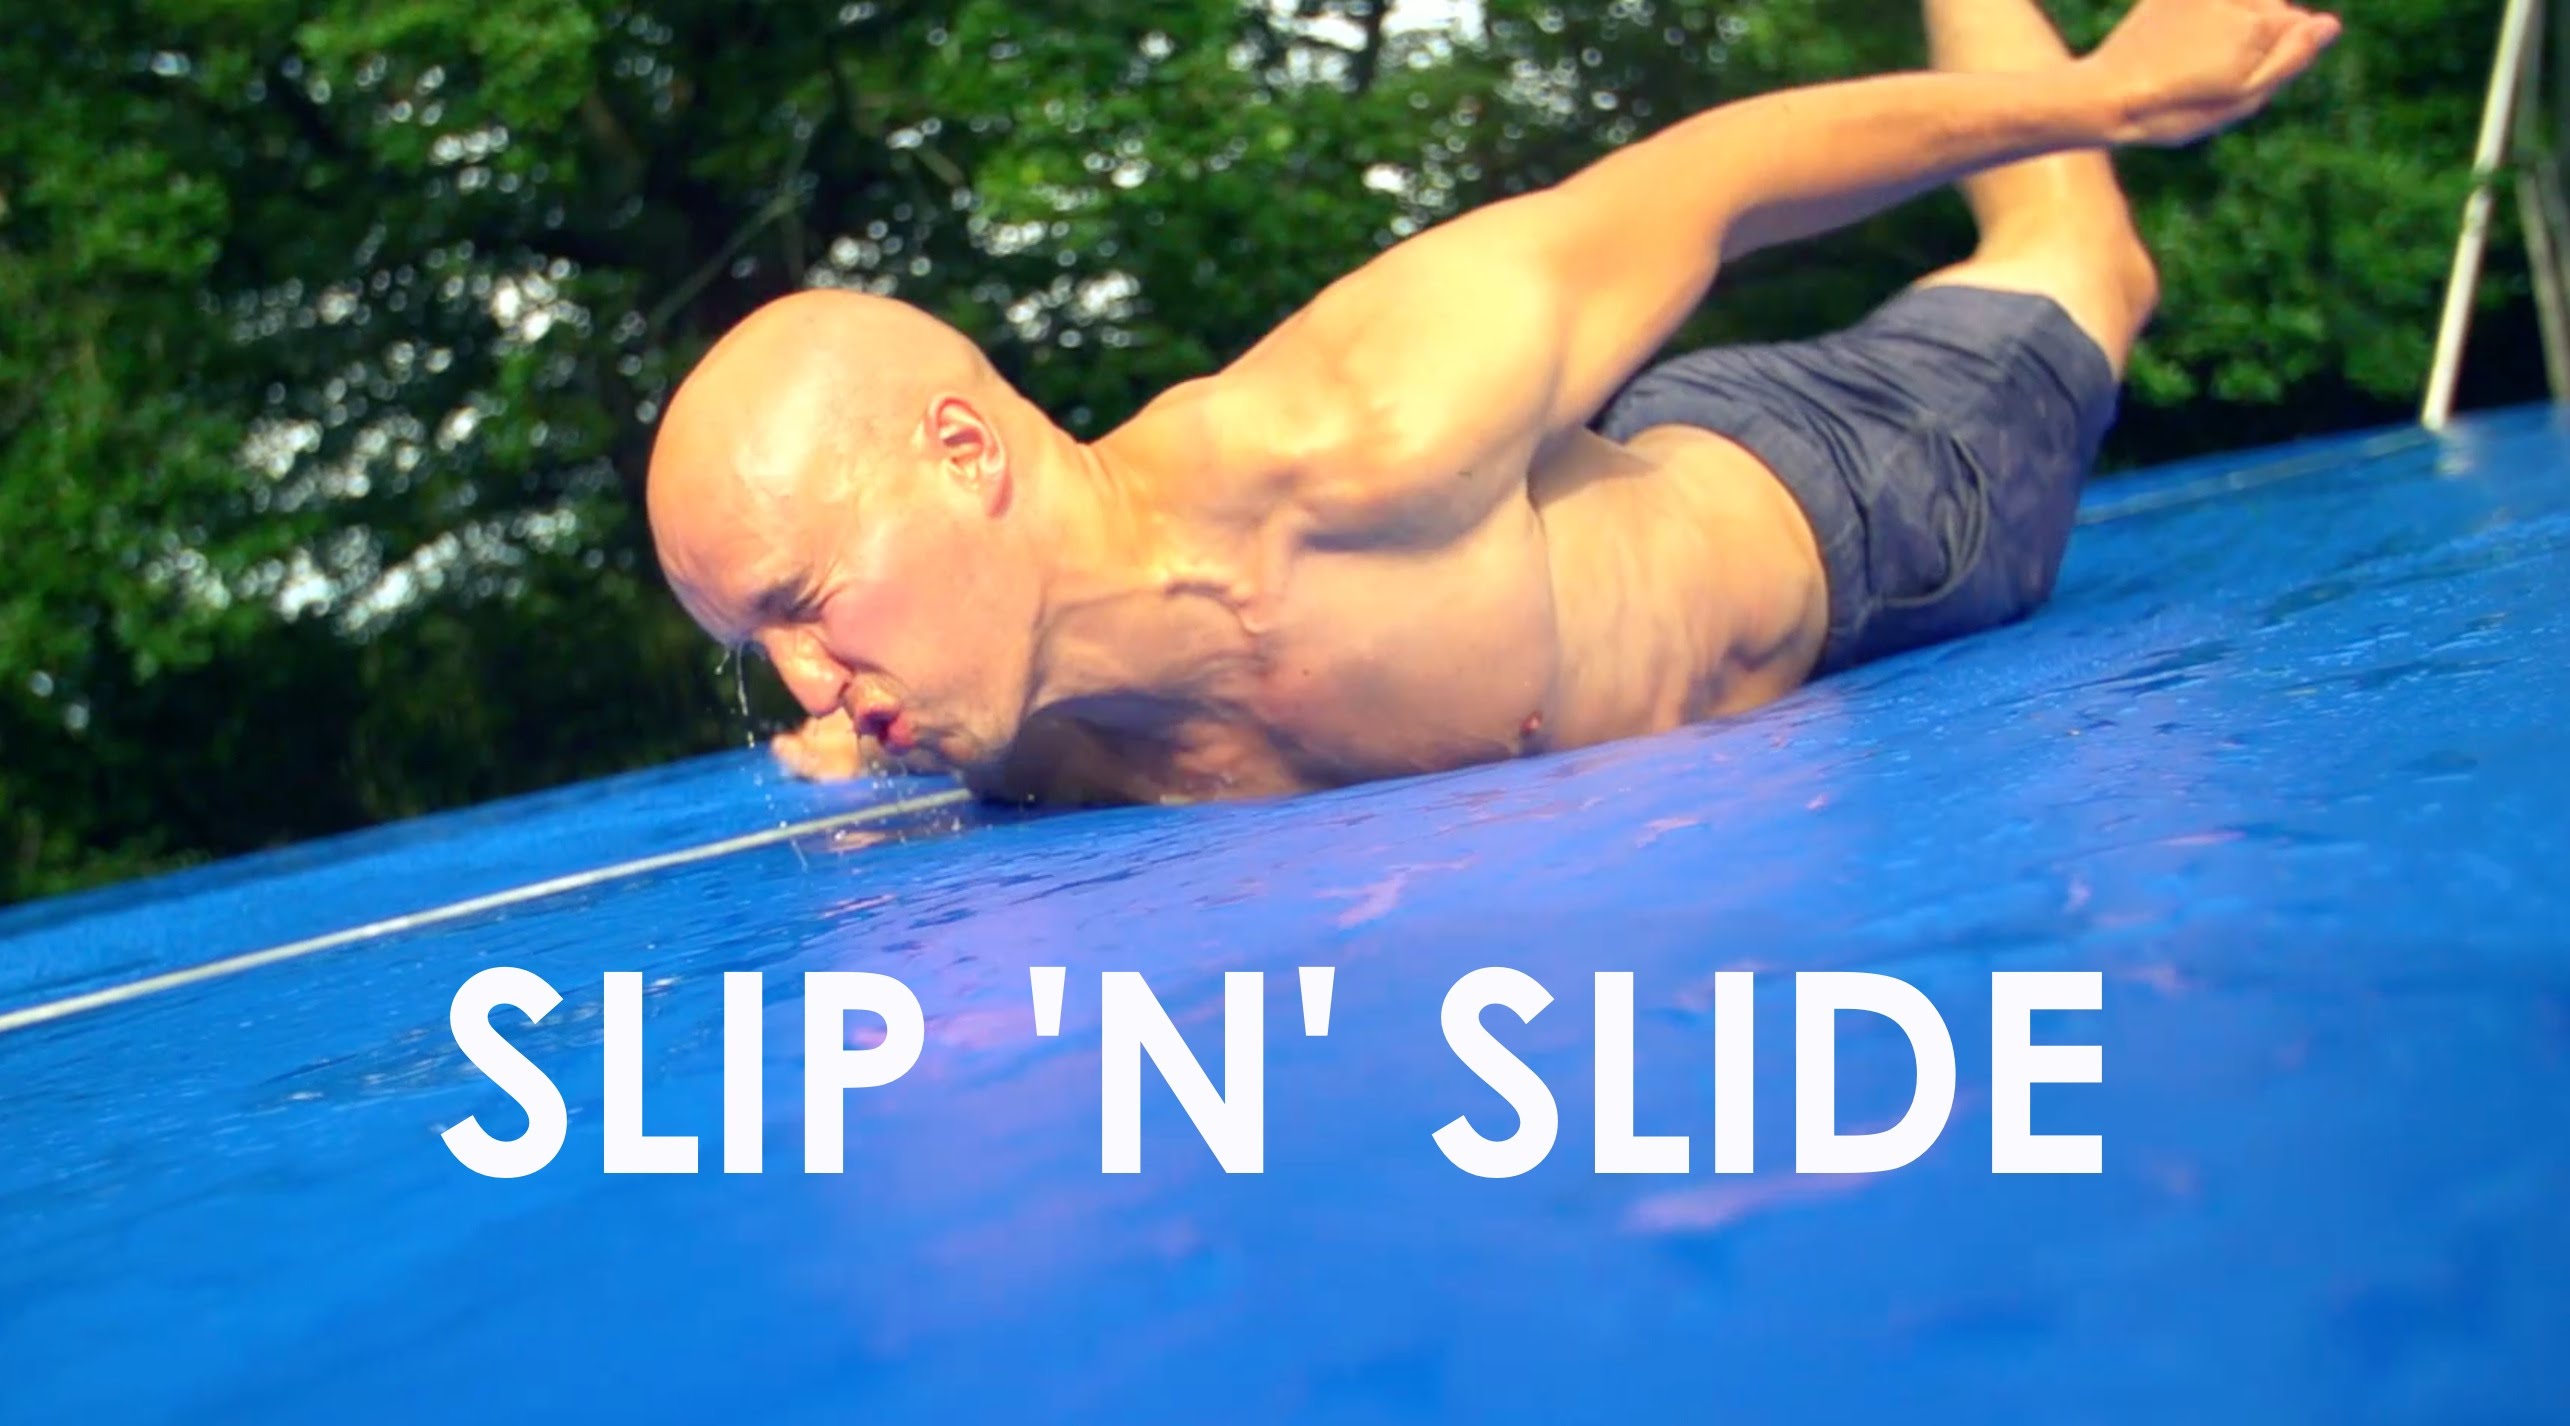 This Slip N' Slide Is Bouncy and It Is Awesome